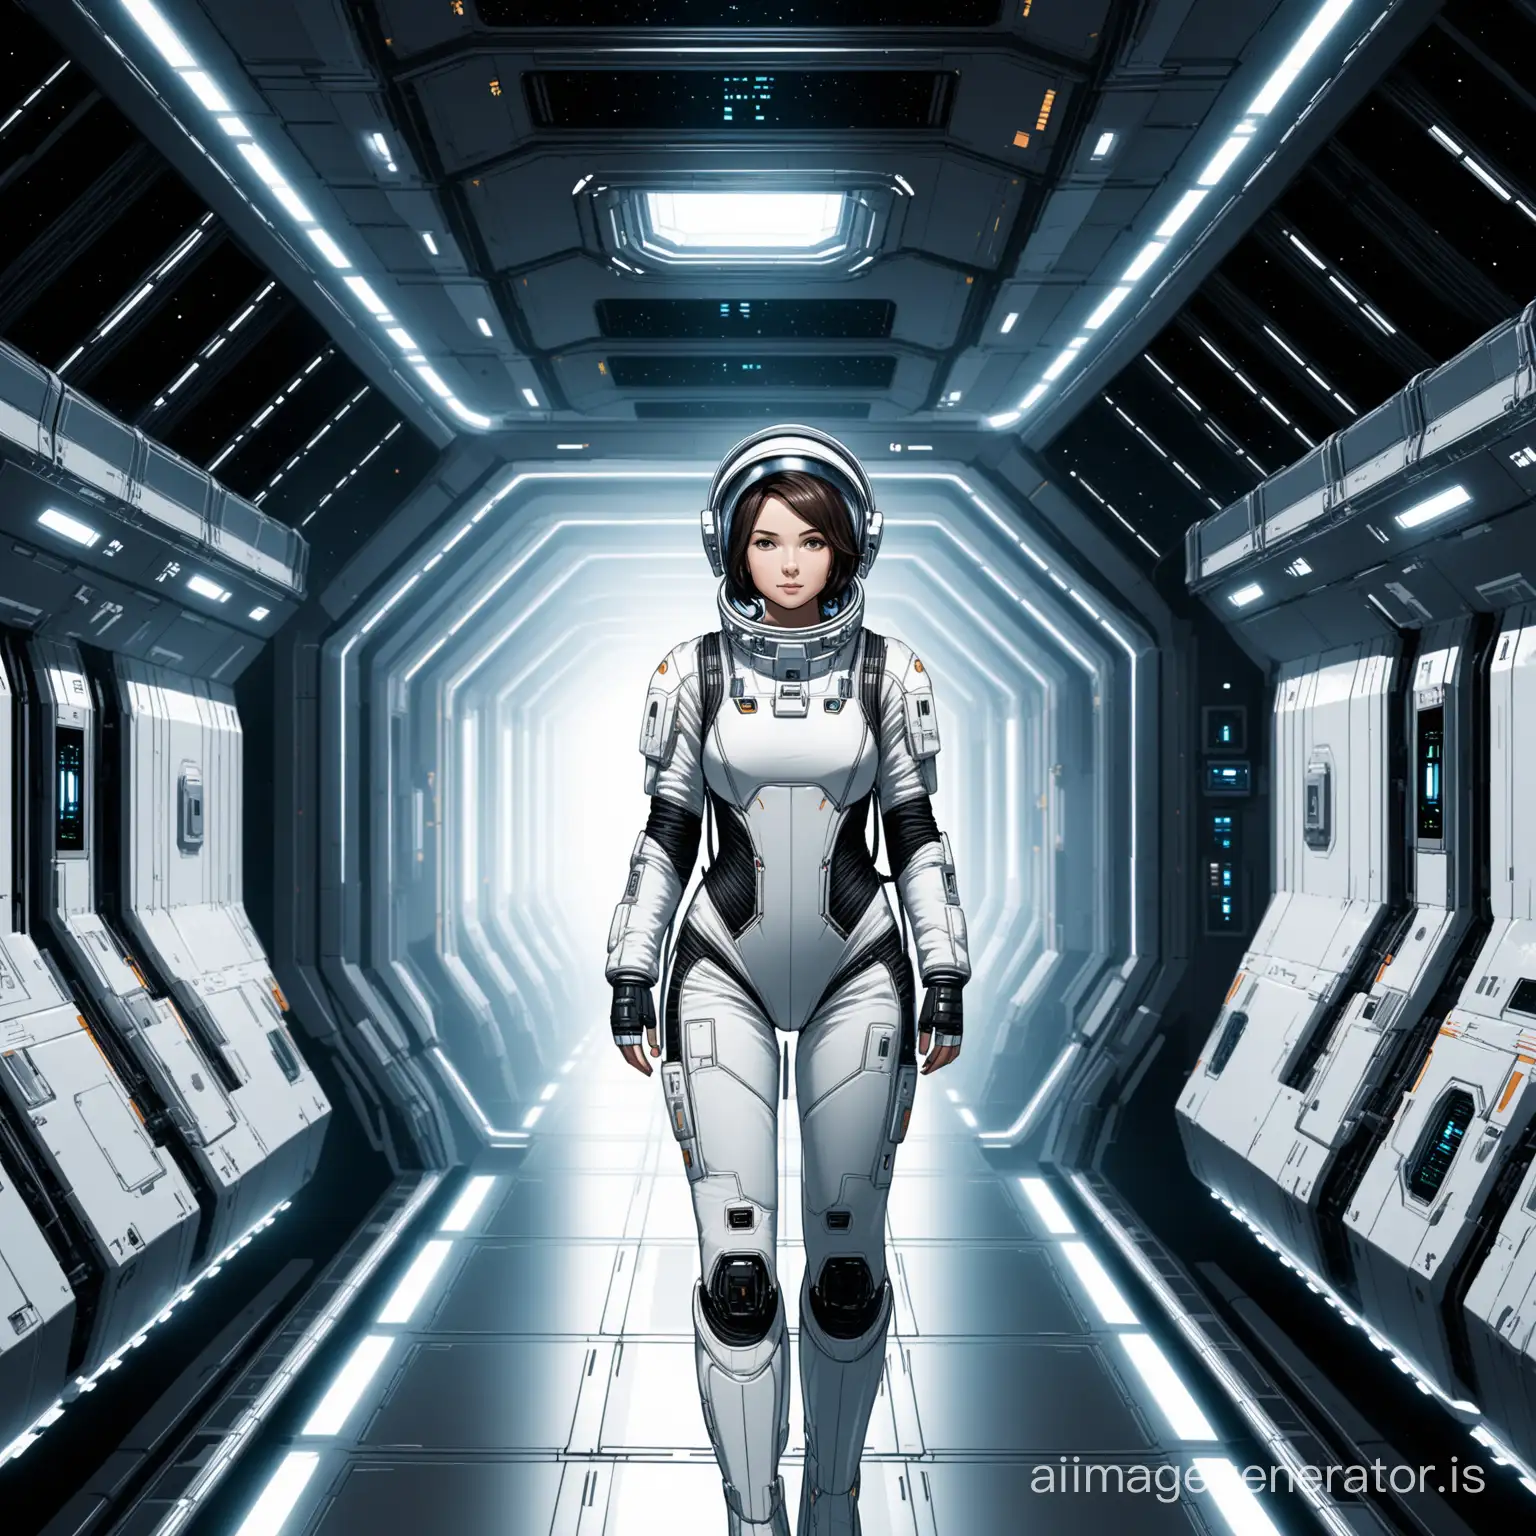 Futuristic-Astronaut-Woman-in-Robotic-Suit-Inside-Space-Station